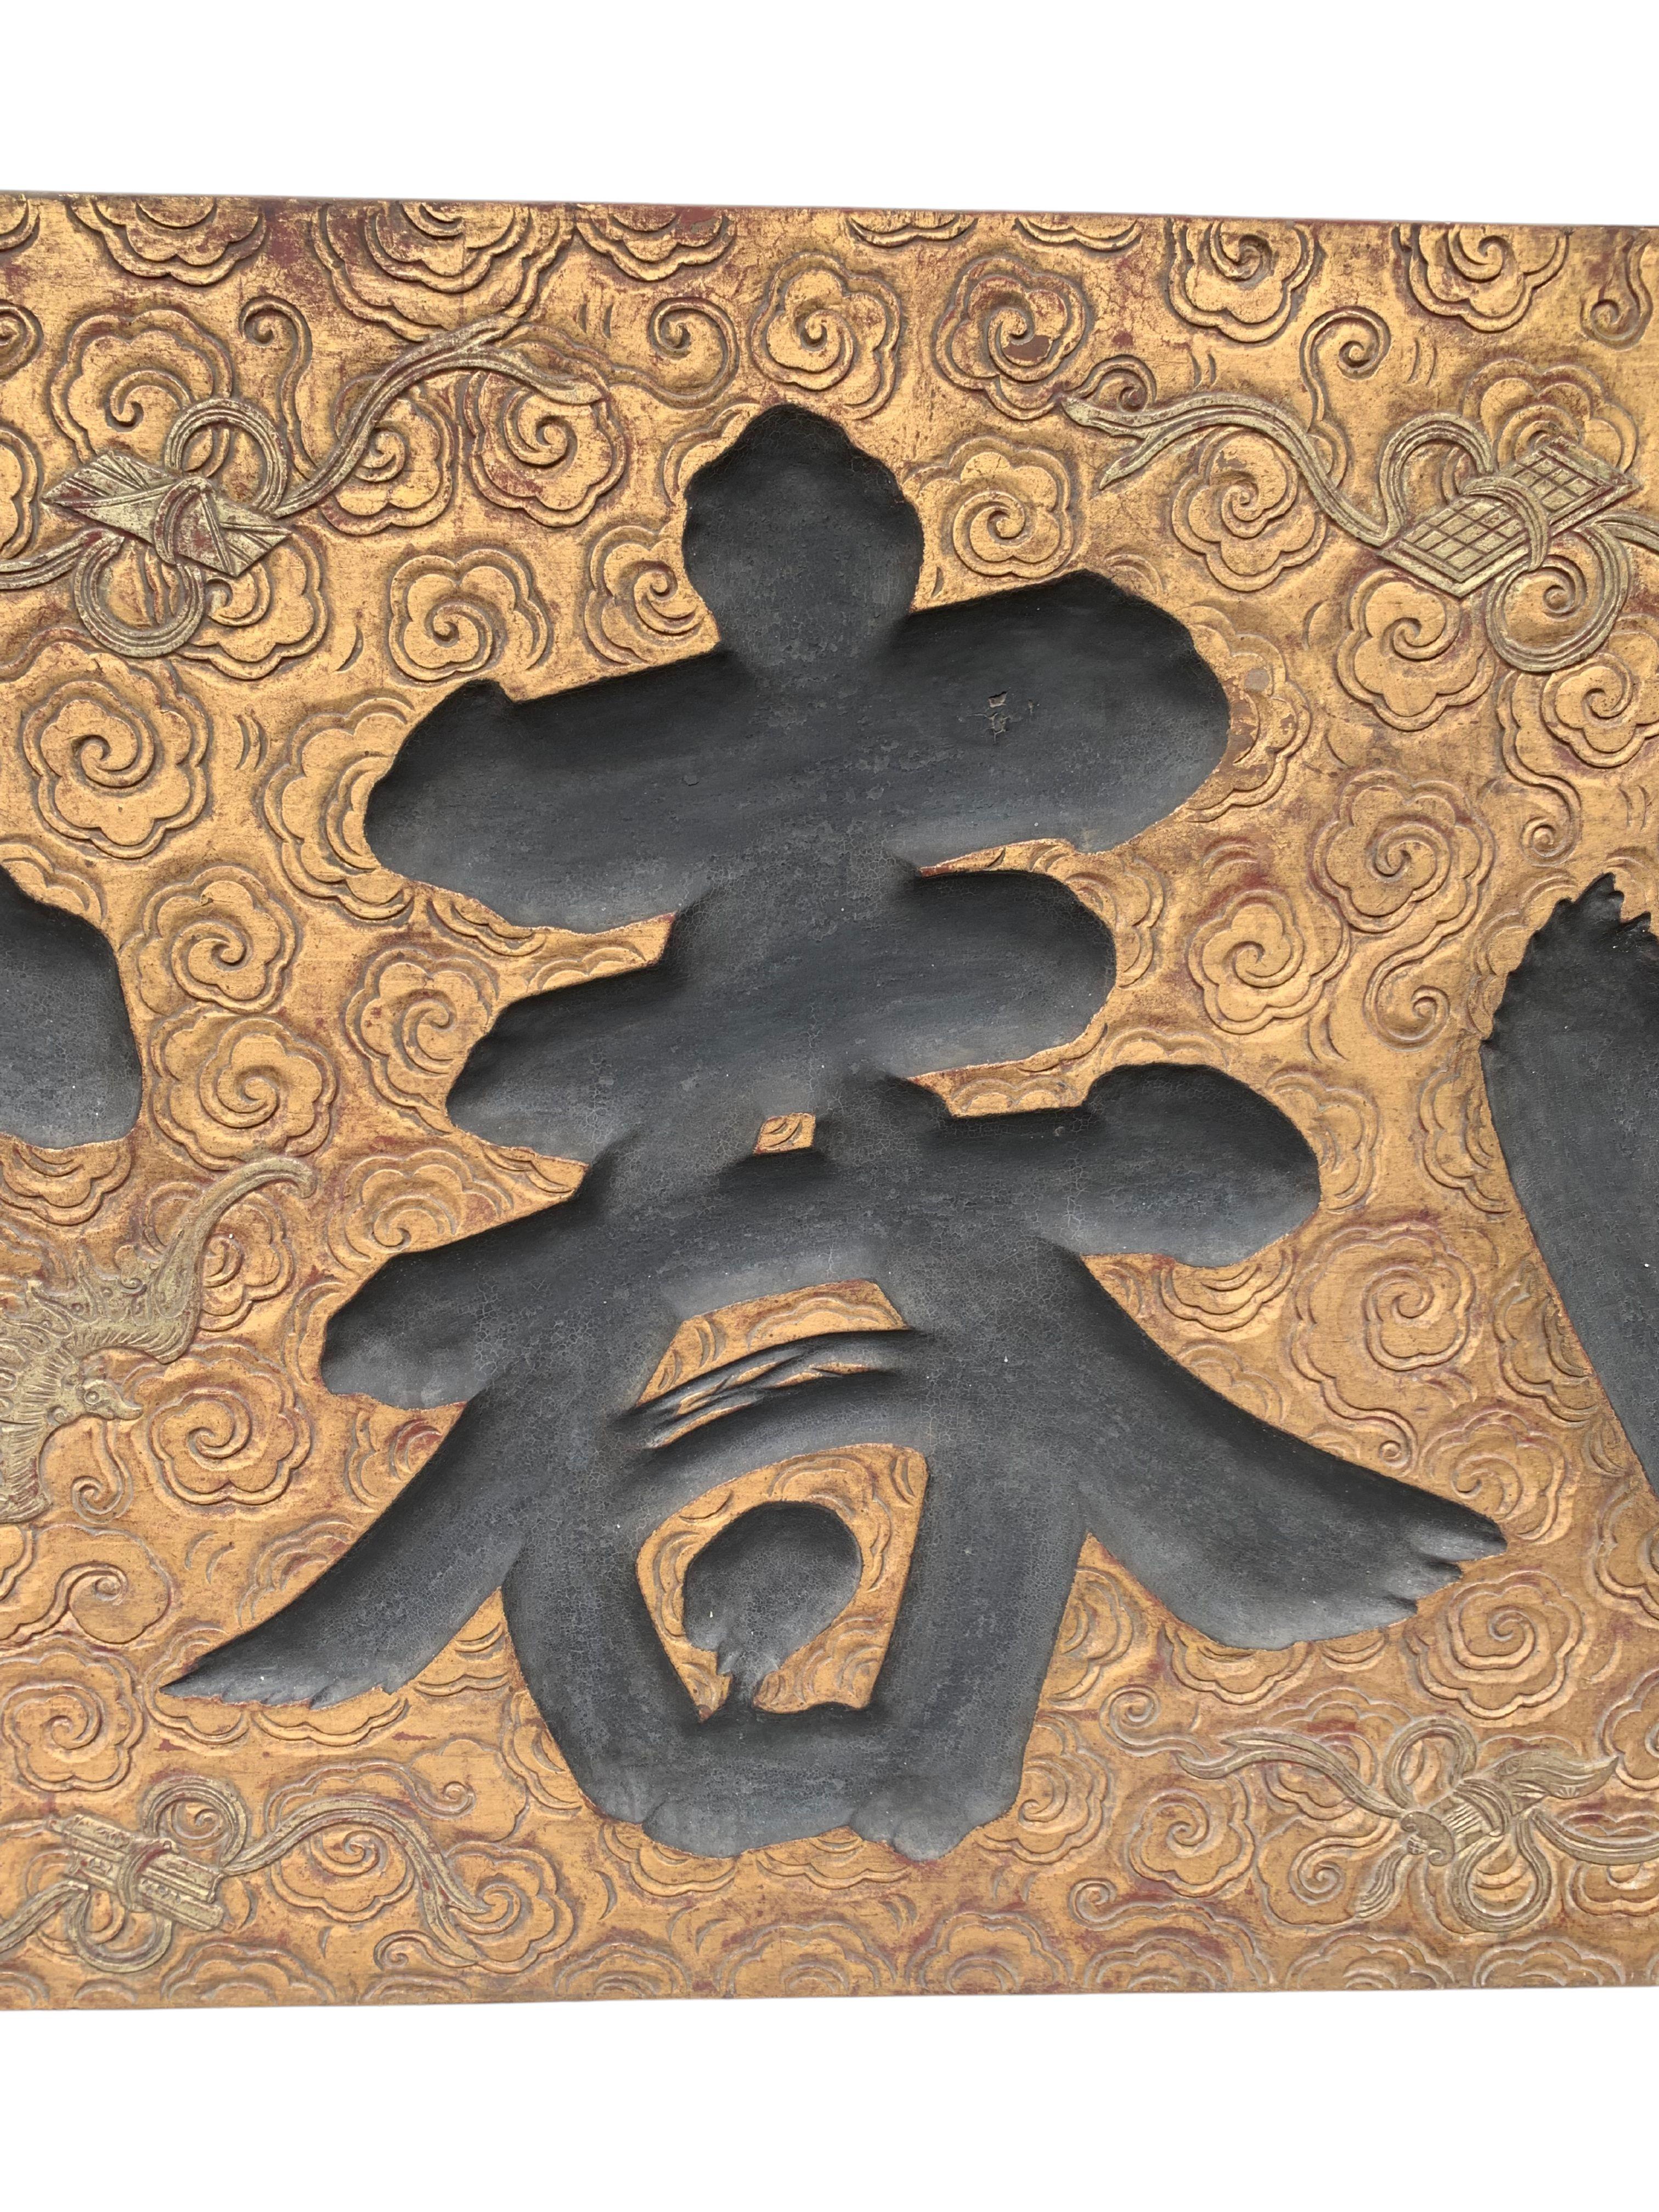 Hand-Crafted Large Chinese Solid Wood Signboard Gilded with Calligraphy, C. 1900